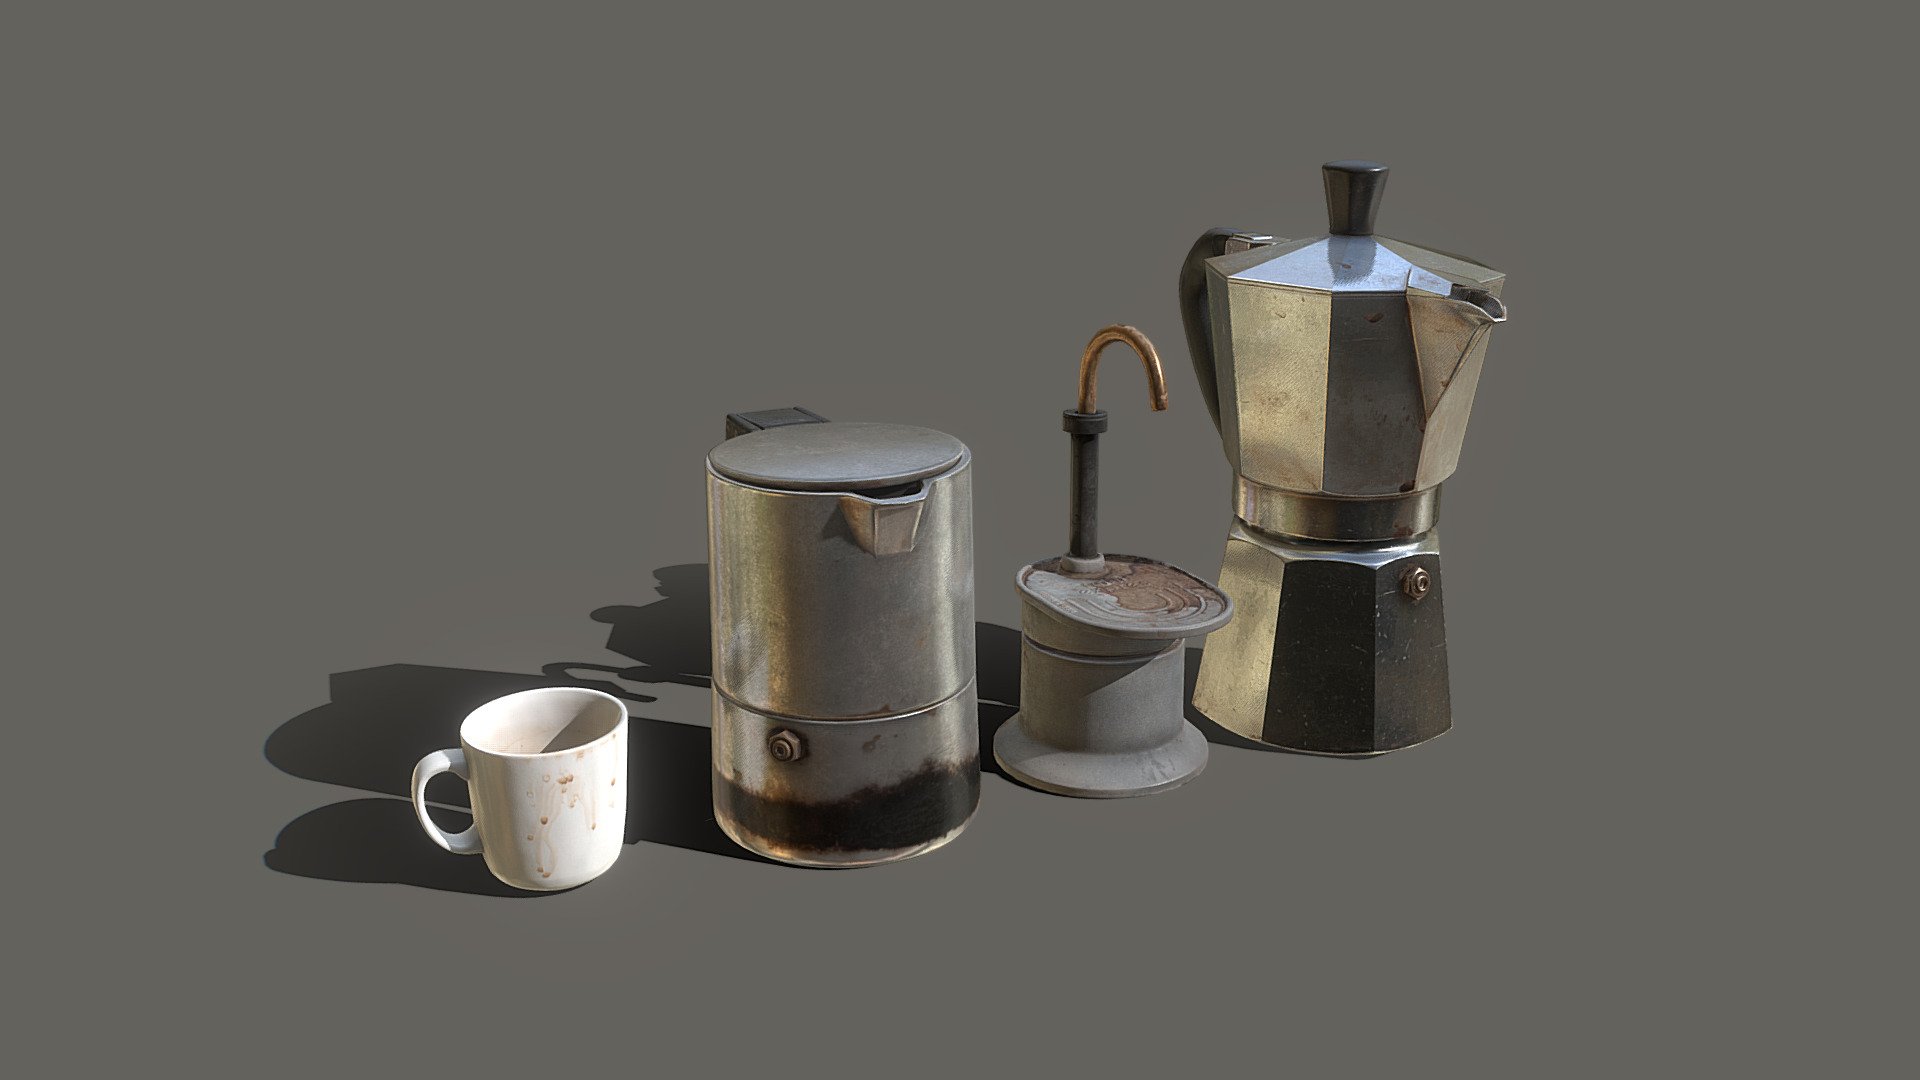 Stove top Moka and Espresso maker (+Mug).
Photogrammetry scans from Reality capture to Low poly - Coffee Makers - 3D model by Tommy Pengilley (@pengilley) 3d model